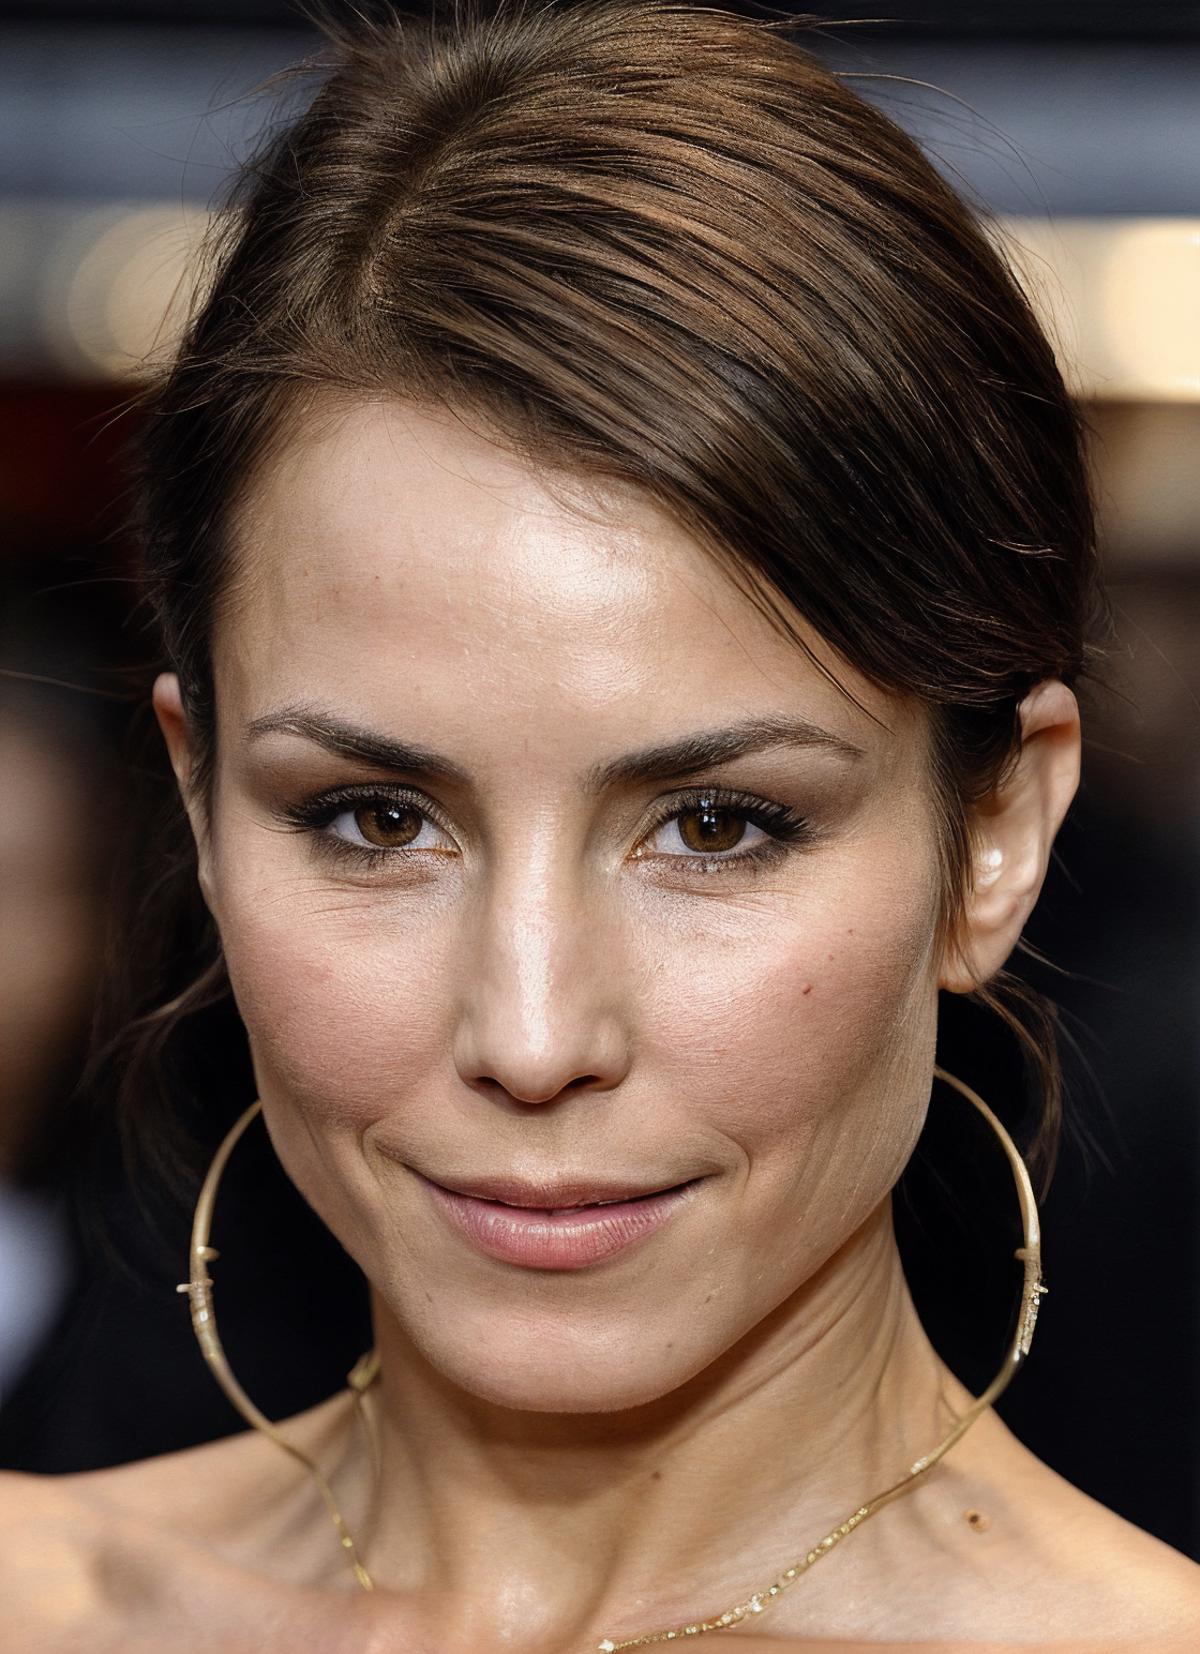 Noomi Rapace image by malcolmrey